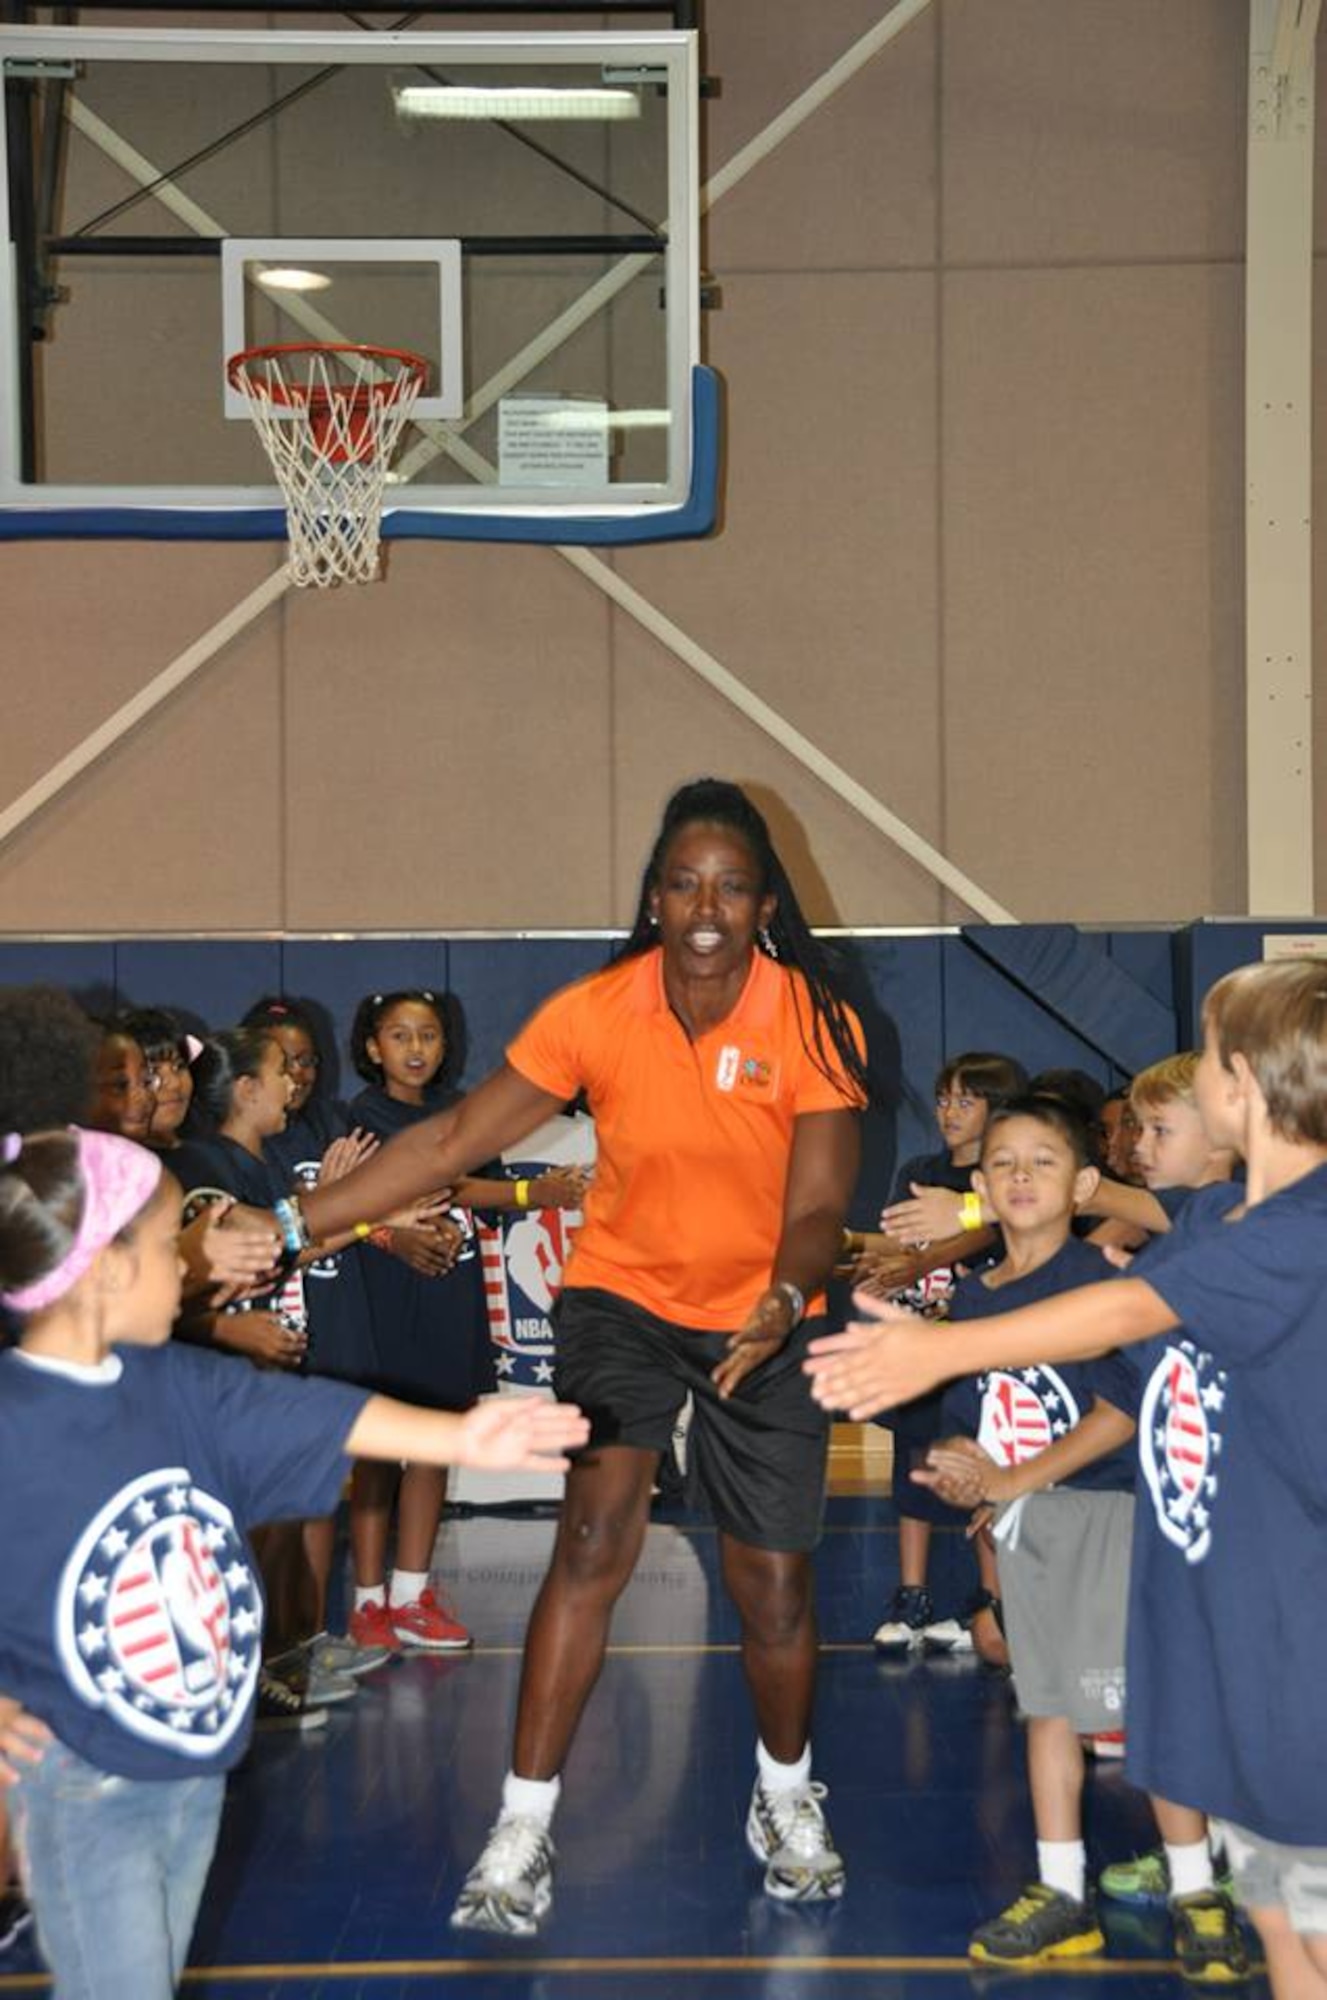 Ruthie Bolton, former Women’s National Basketball Association star and two-time Olympic gold medalist, is greeted by military children at March Air Reserve Base, Calif., during the NBA Cares Hoops for Troops basketball clinic Sunday, Sept. 8, 2013. The NBA Cares program sponsored the event in conjunction with the Healthy Base Initiative kickoff. (U.S. Air Force photo/Master Sgt. Linda Welz)